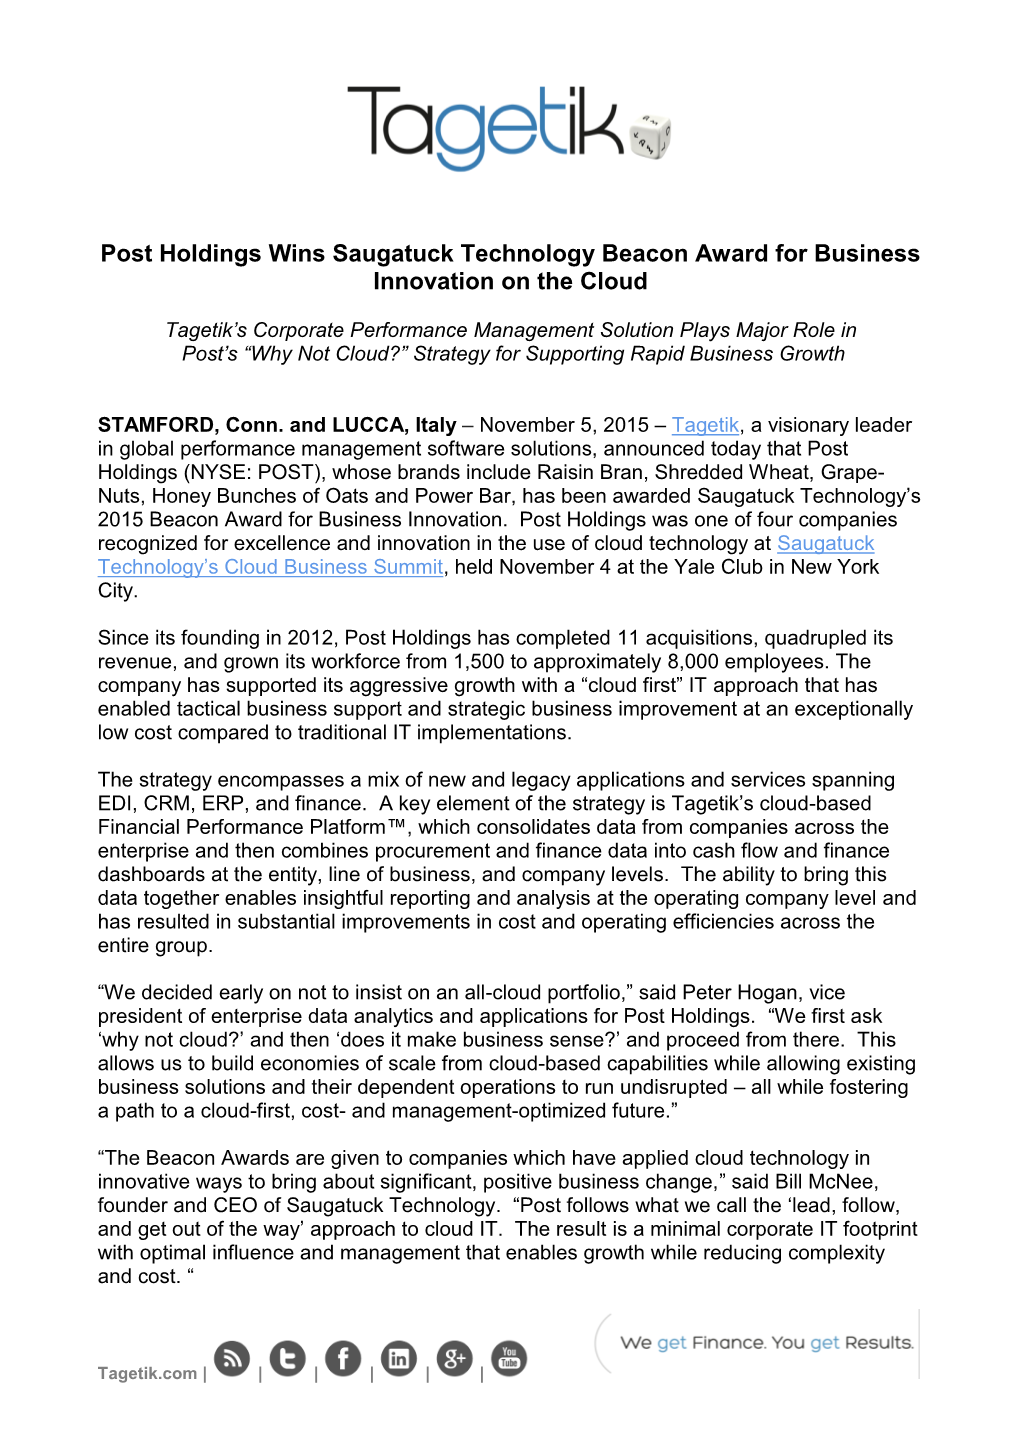 Post Holdings Wins Saugatuck Technology Beacon Award for Business Innovation on the Cloud